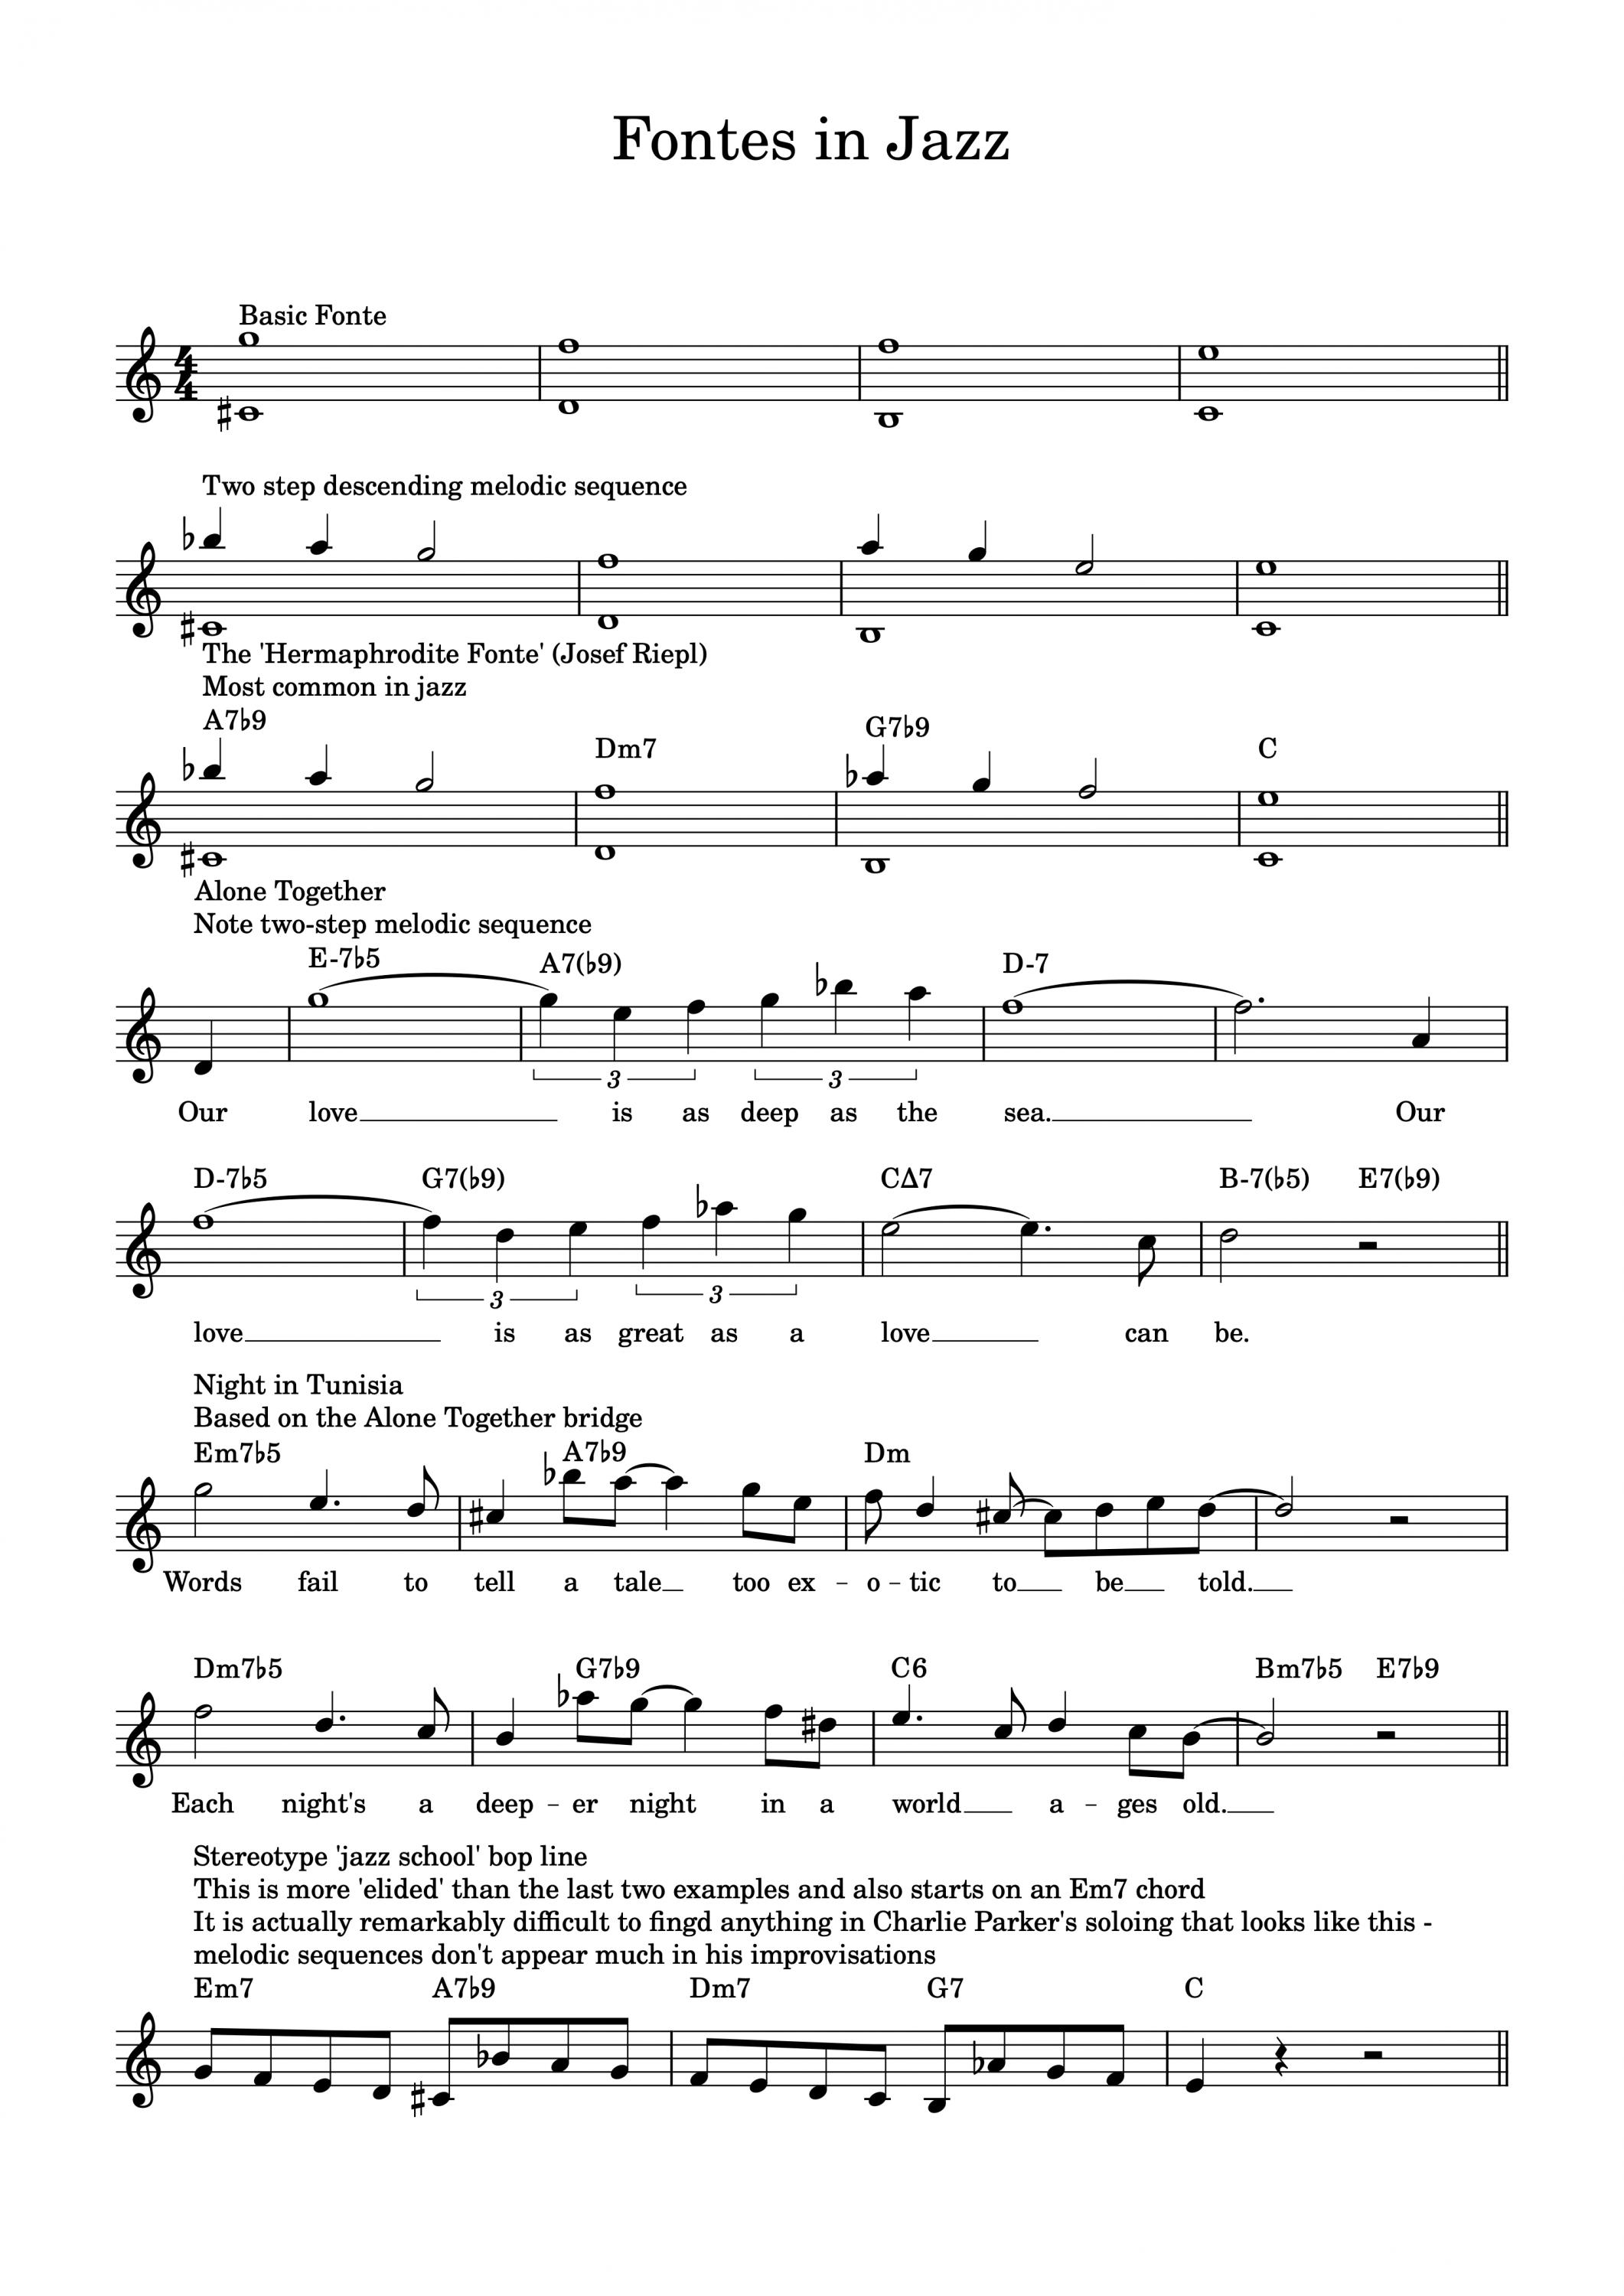 Voice leading/counterpoint approach to standards-fontes-jazz-1-jpg